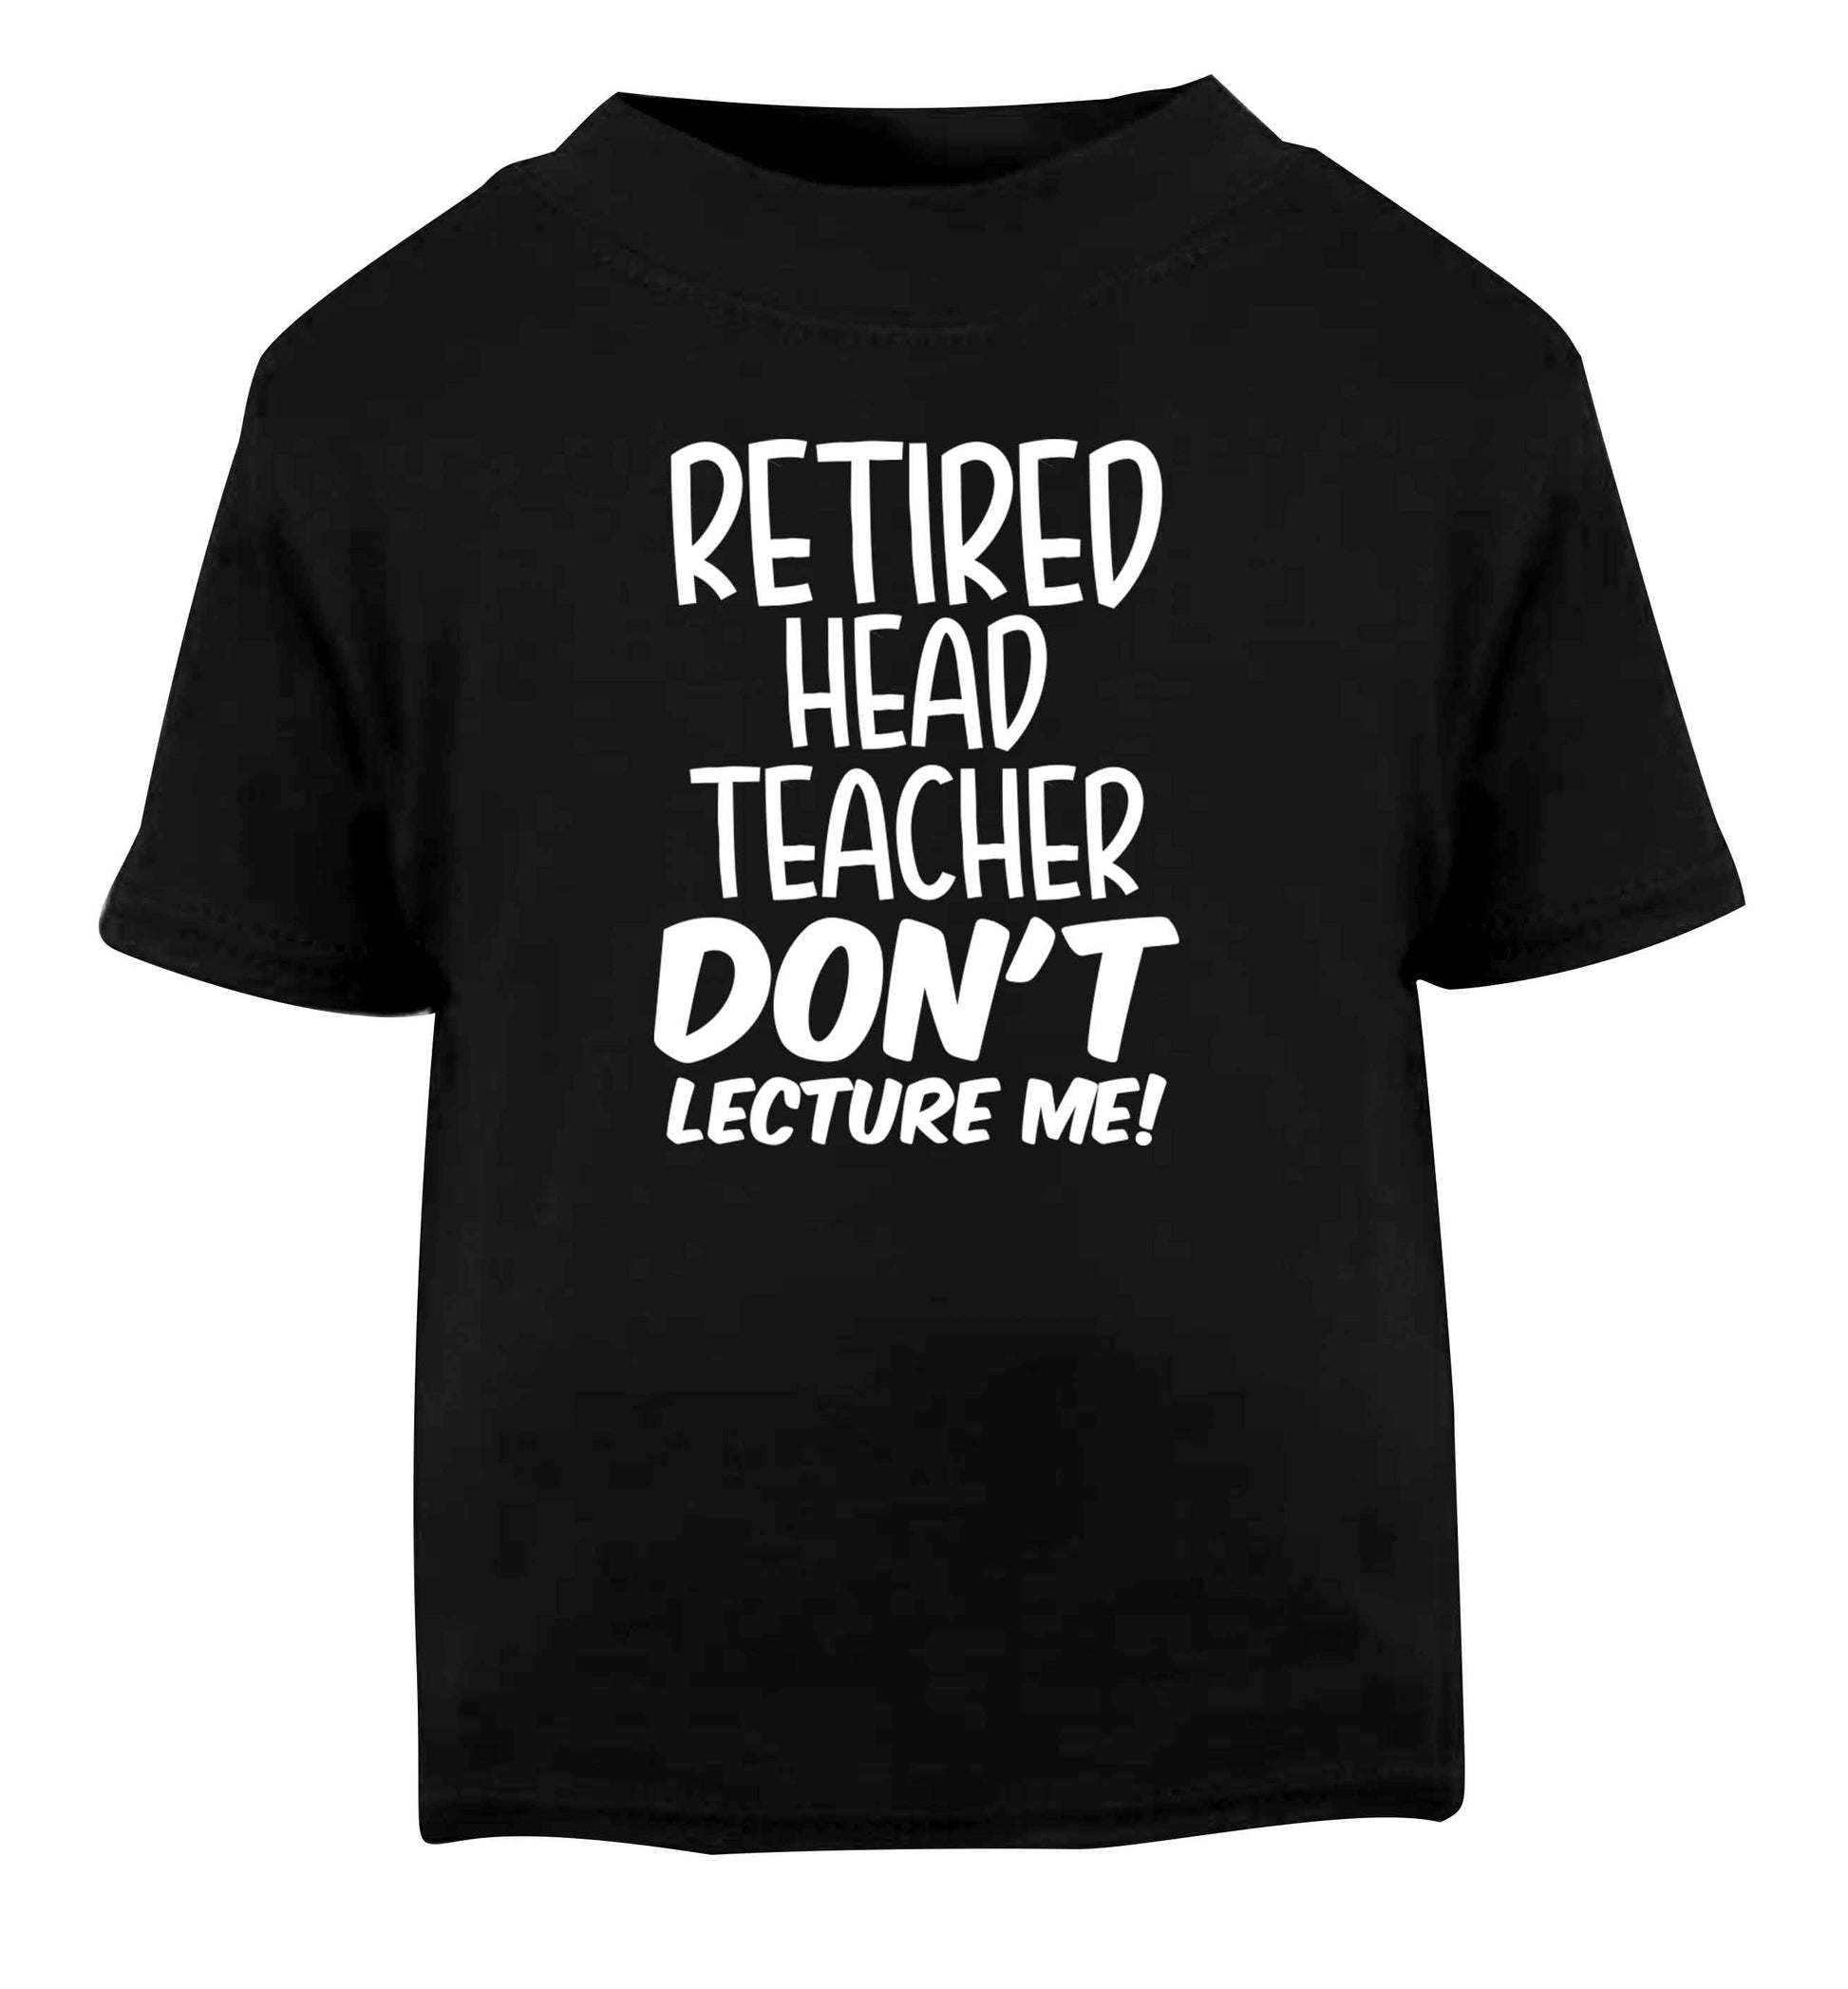 Retired head teacher don't lecture me! Black Baby Toddler Tshirt 2 years